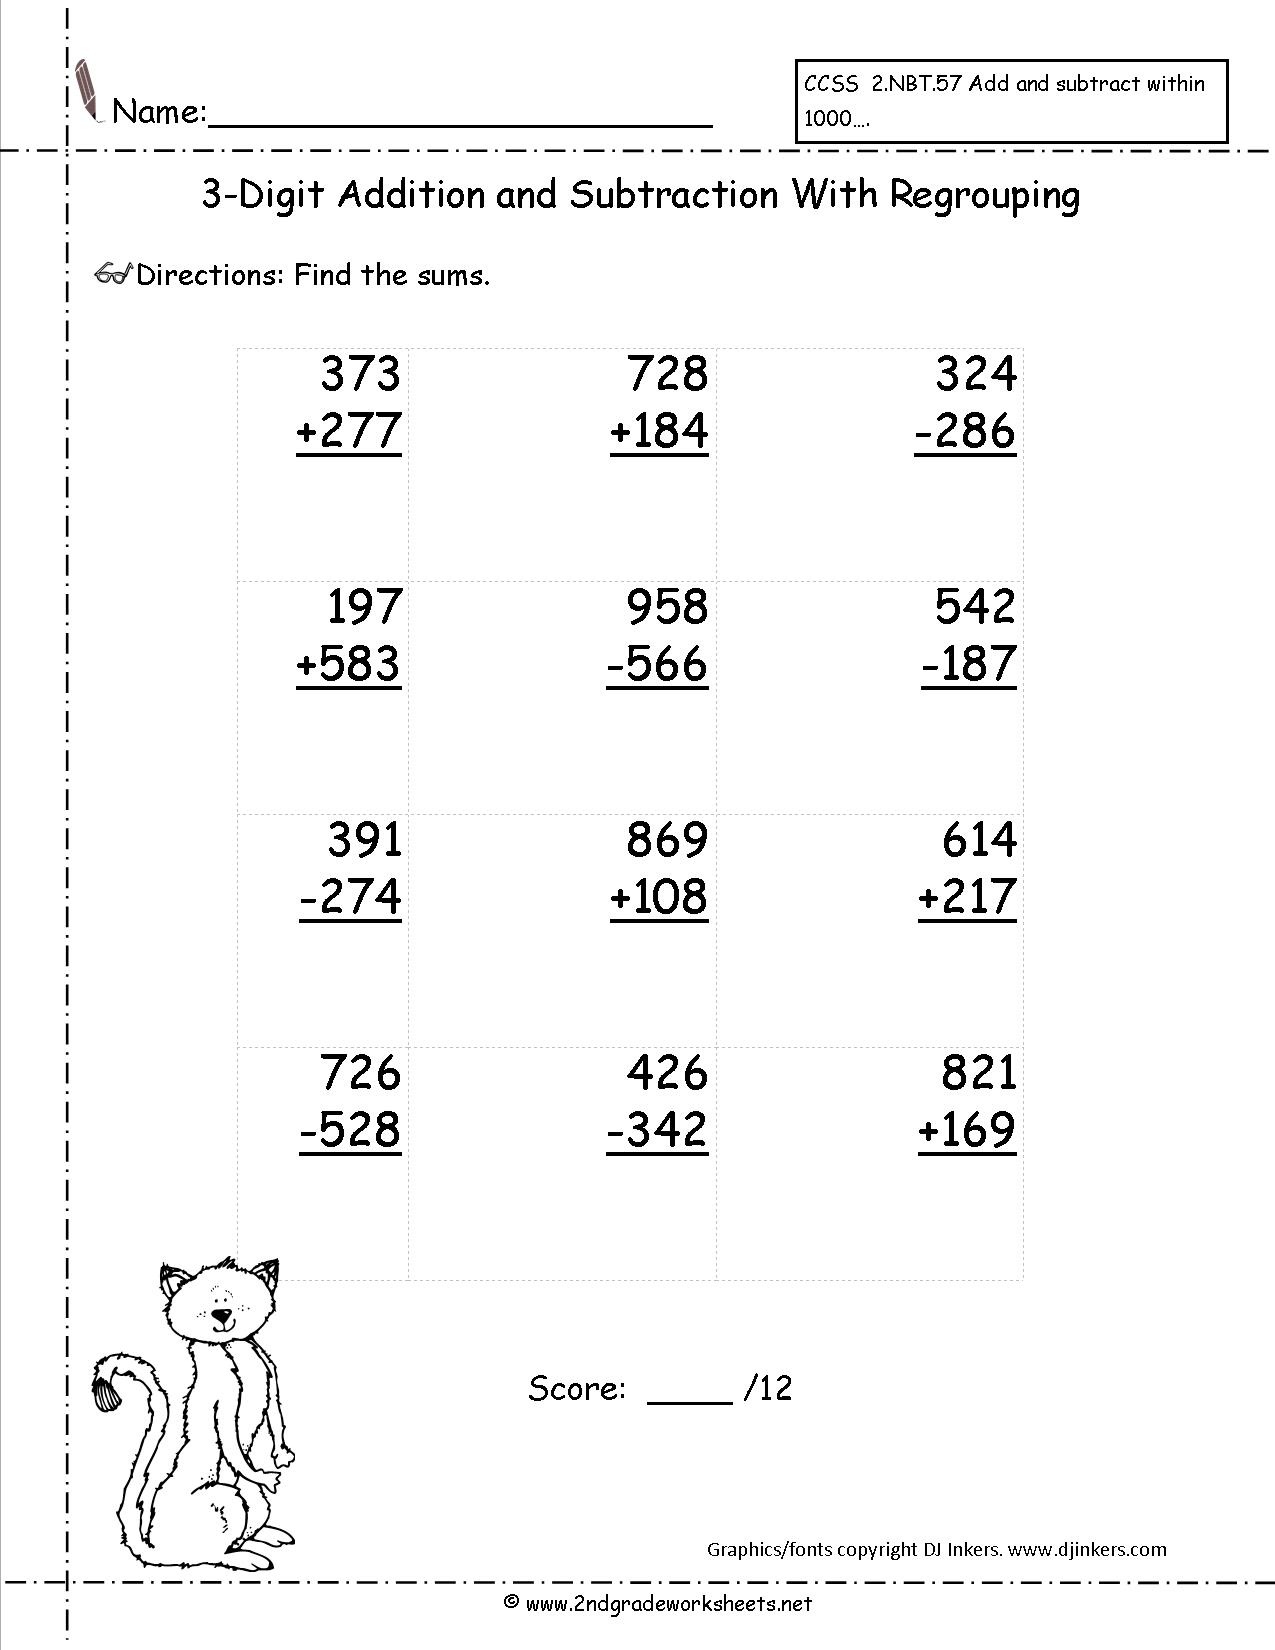 Three Digit Addition And Subtraction Worksheets From The Teacher&amp;#039;s Guide - Free Printable 3 Digit Subtraction With Regrouping Worksheets